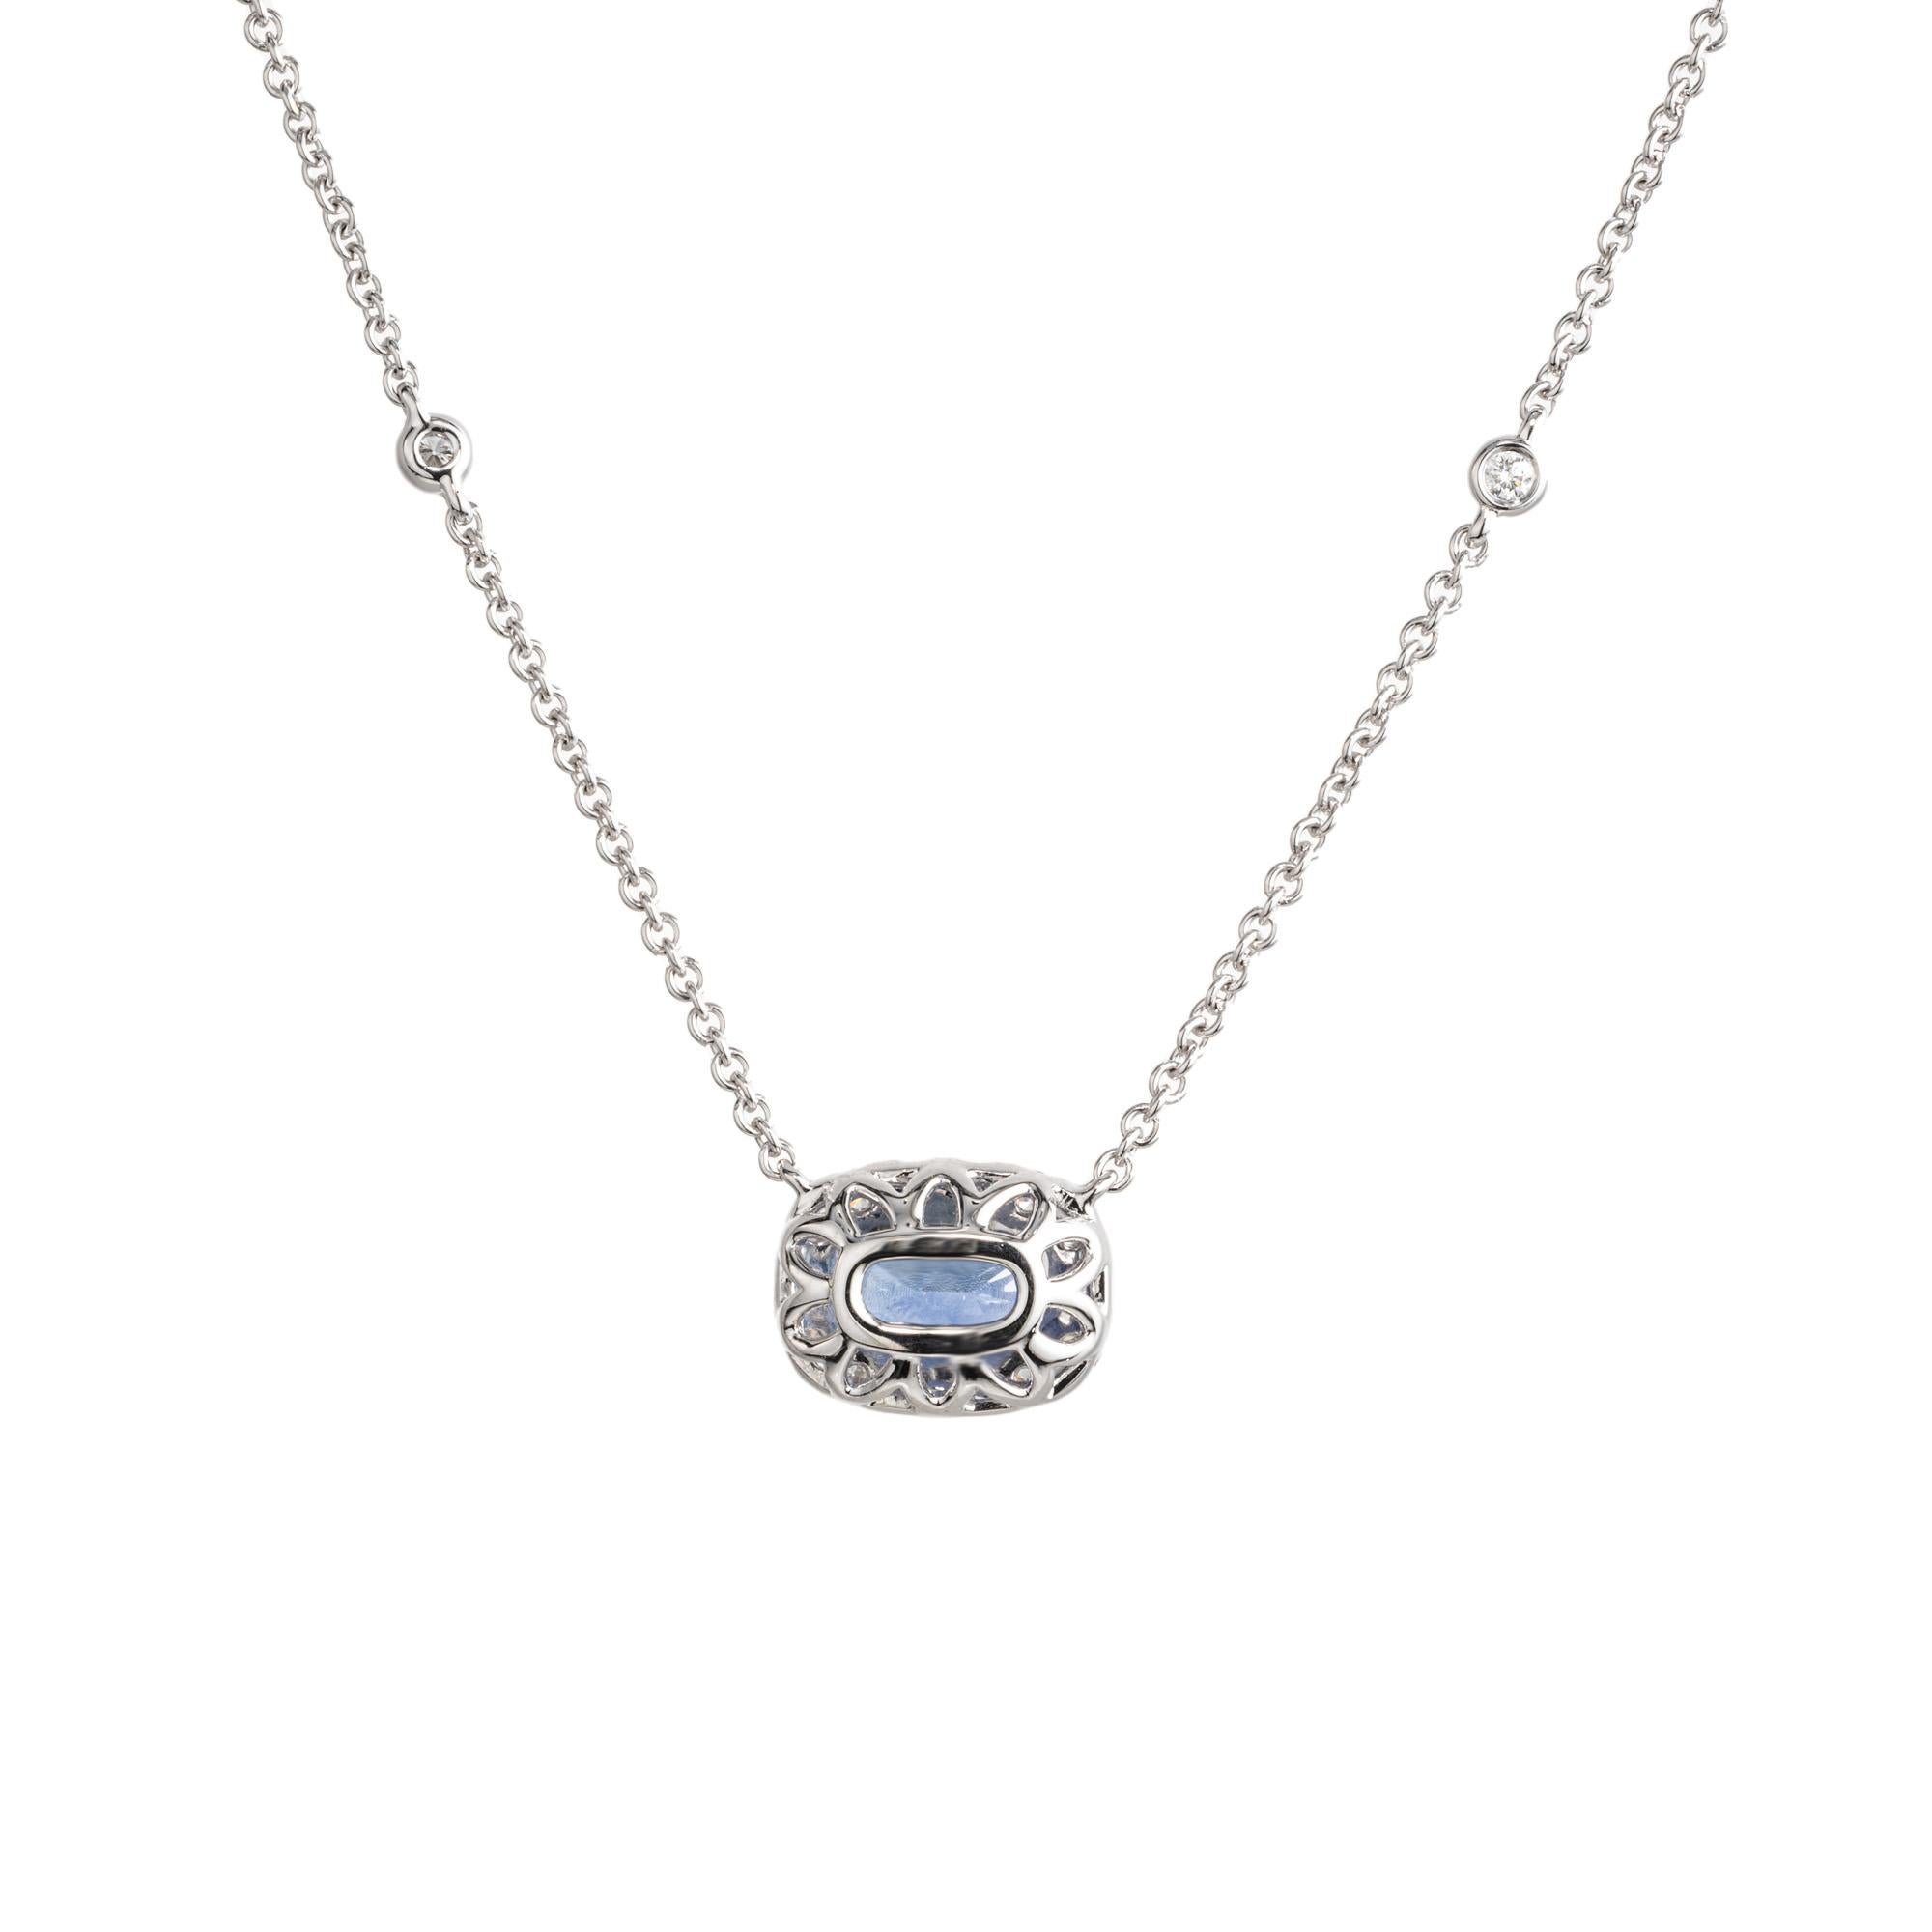 Oval Cut Peter Suchy 1.29 Carat Sapphire Diamond Halo White Gold Pendant Necklace For Sale